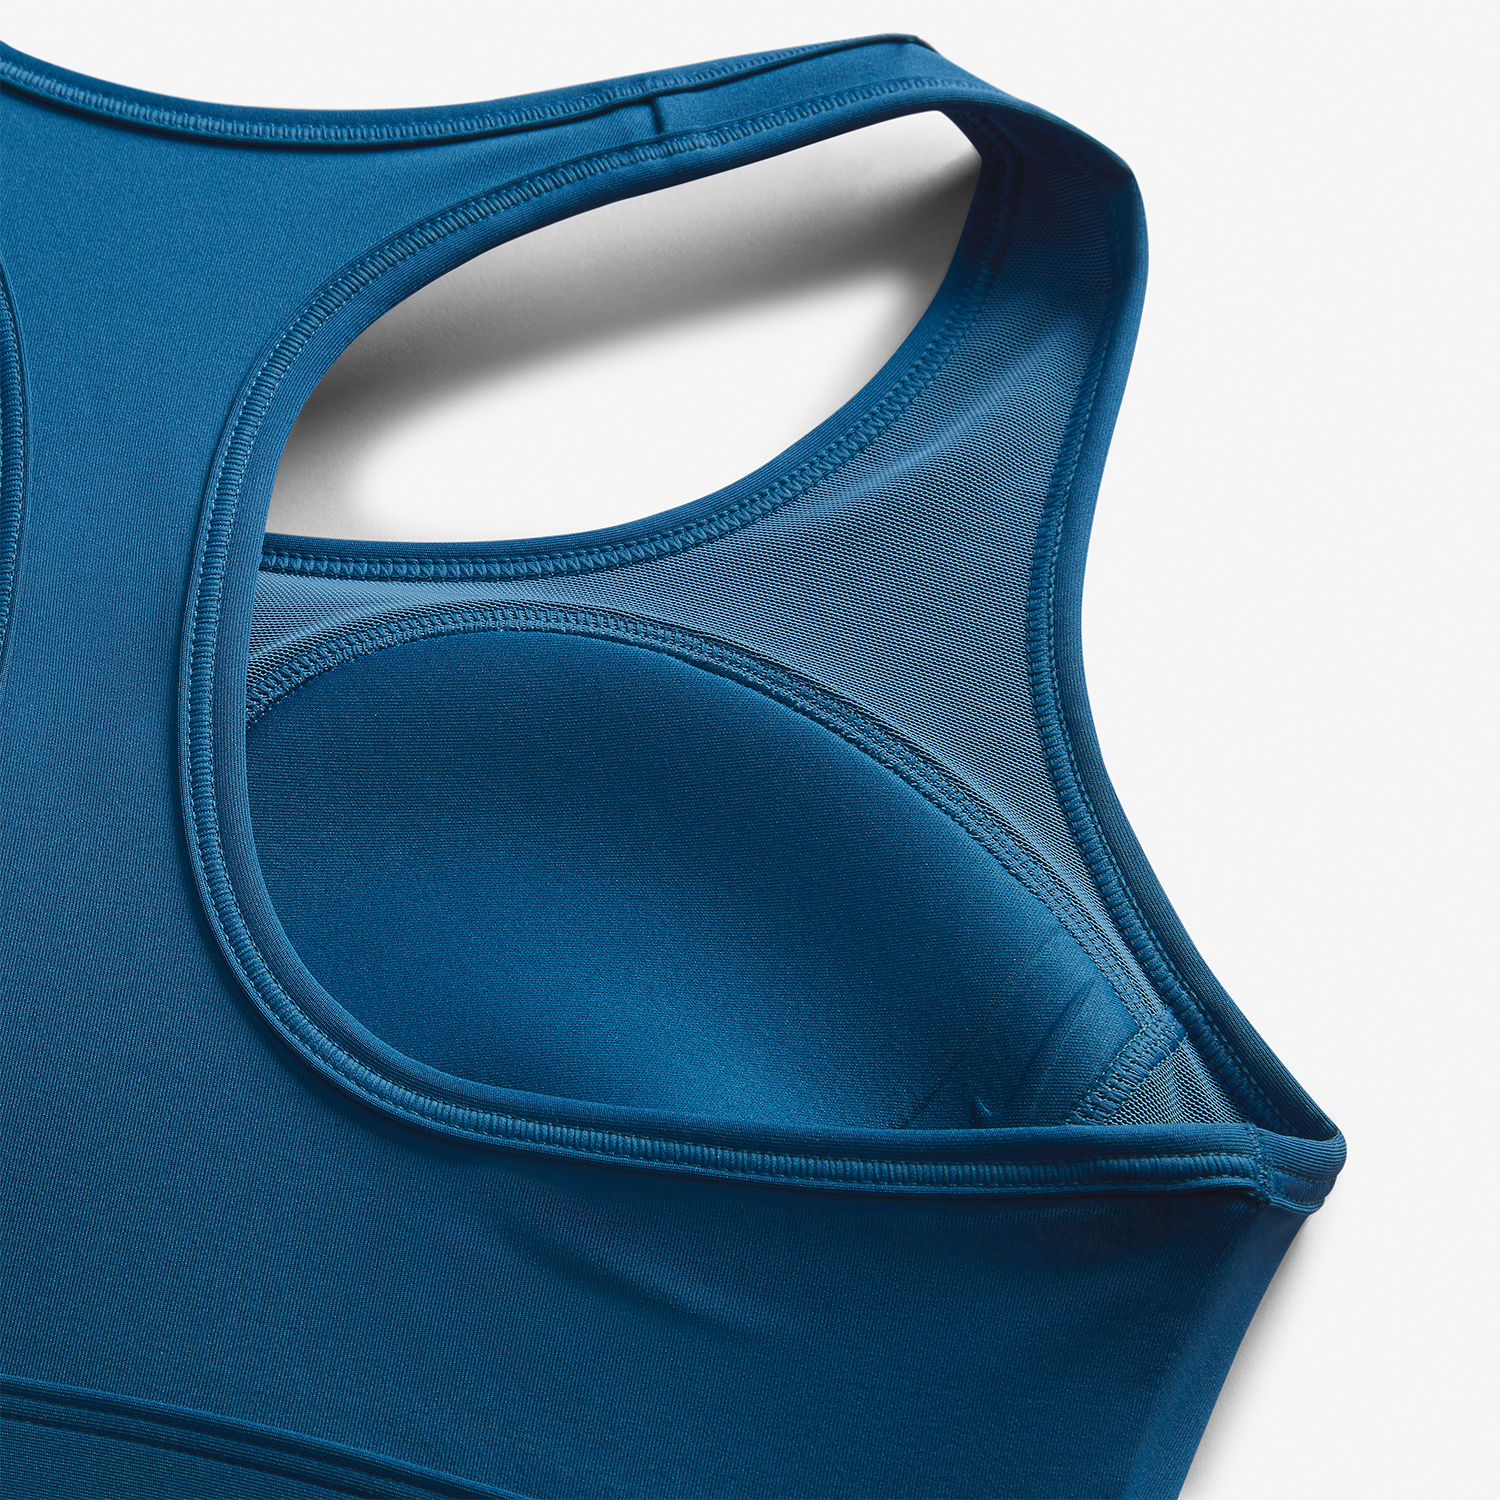 Buy Nike Blue Dri-FIT Swoosh High Support Sports Bra from Next Luxembourg